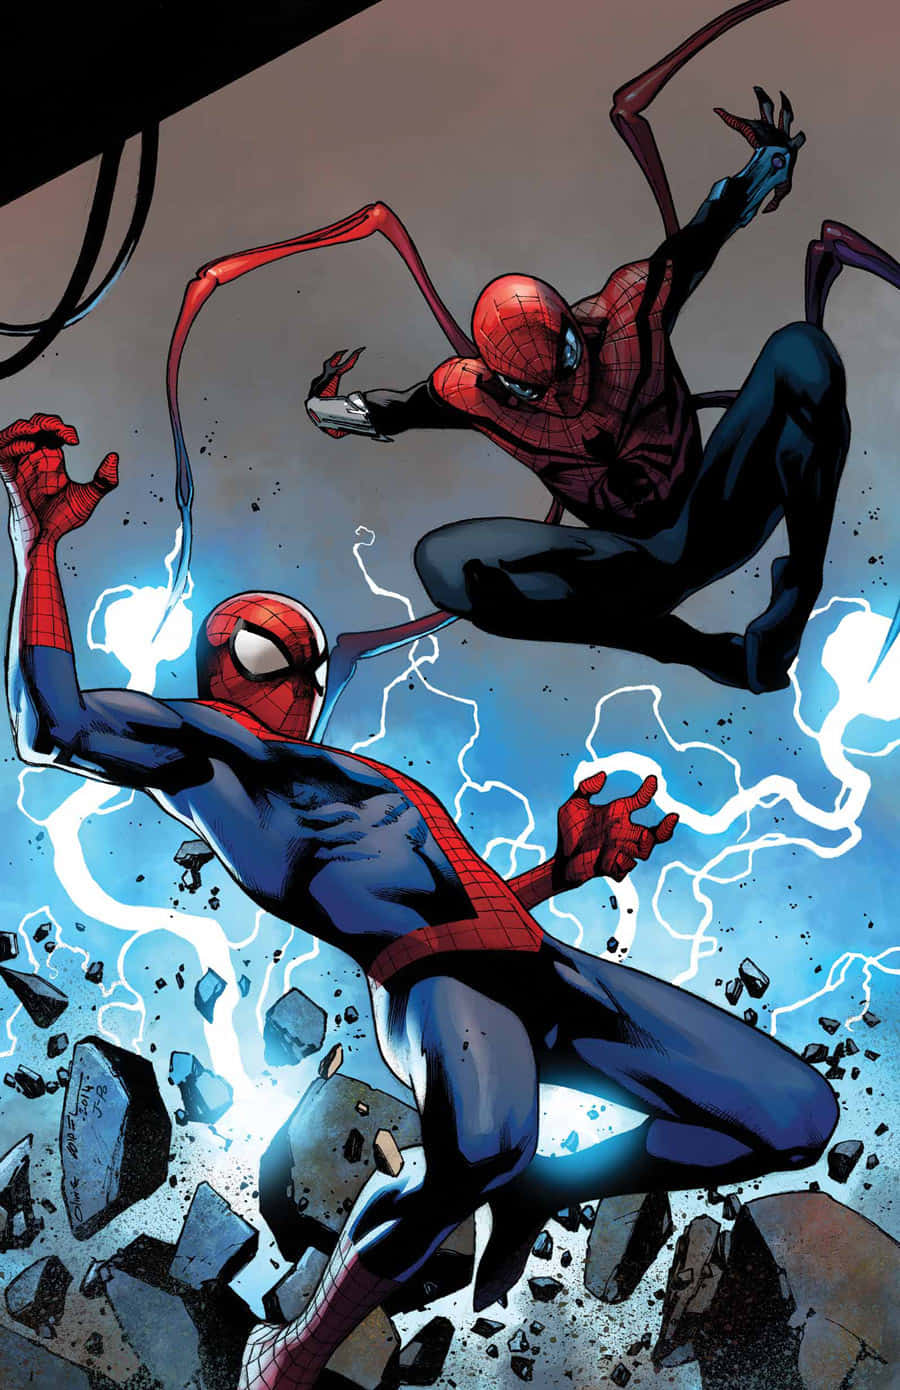 Superior Spider-Man striking a fierce pose in a vibrant action scene Wallpaper